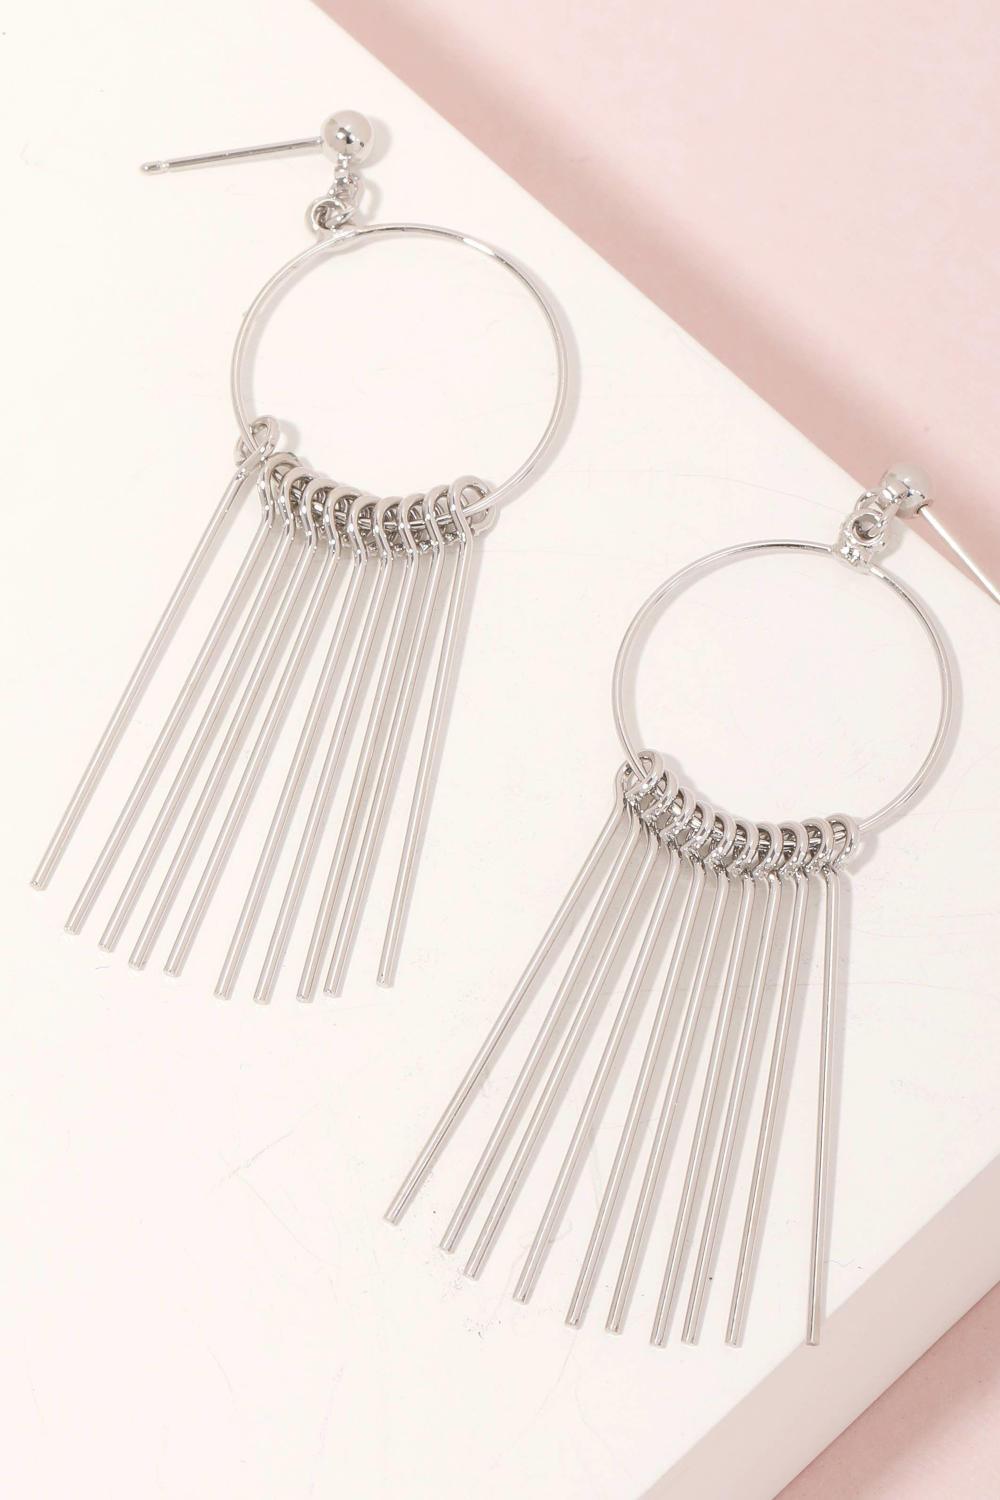 Thin Fringe Dangle Earrings-Gold/Silver - Strawberry Moon Boutique